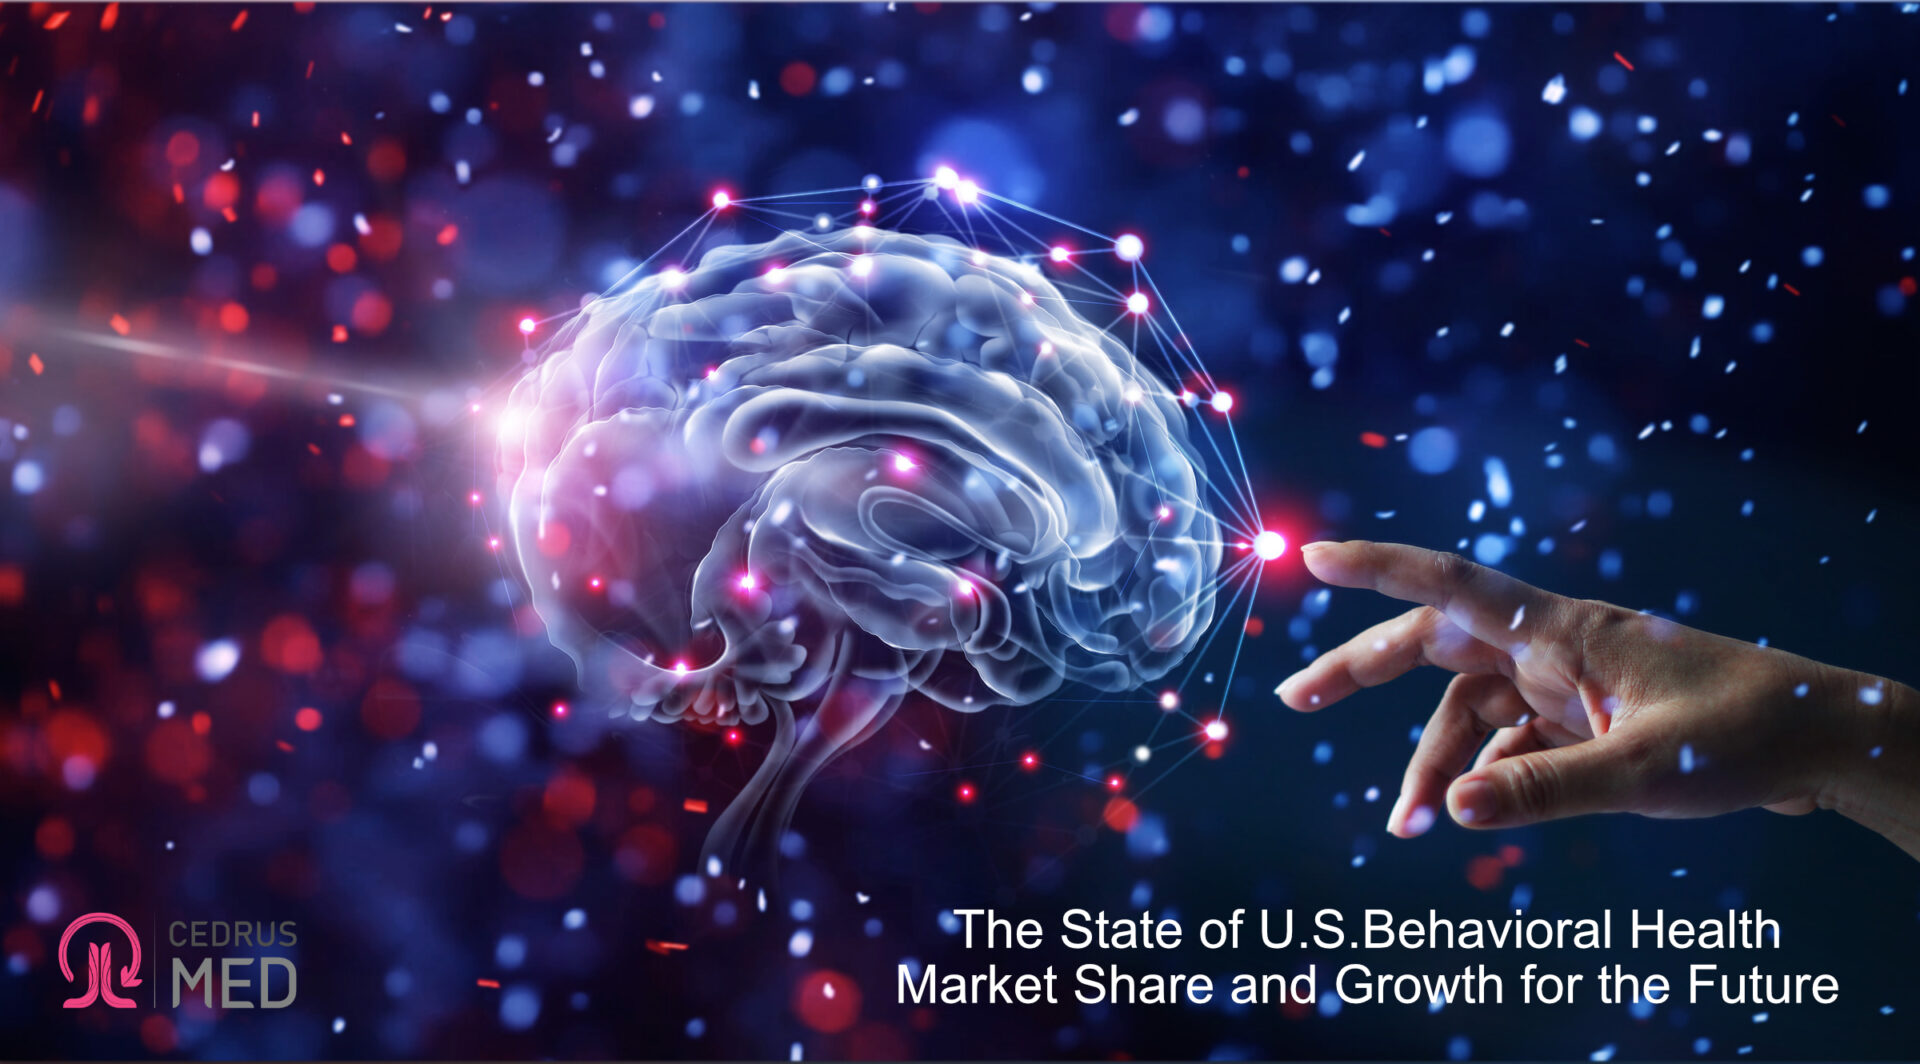 The State of U.S. Behavioral Health Market Share and Growth for the Future